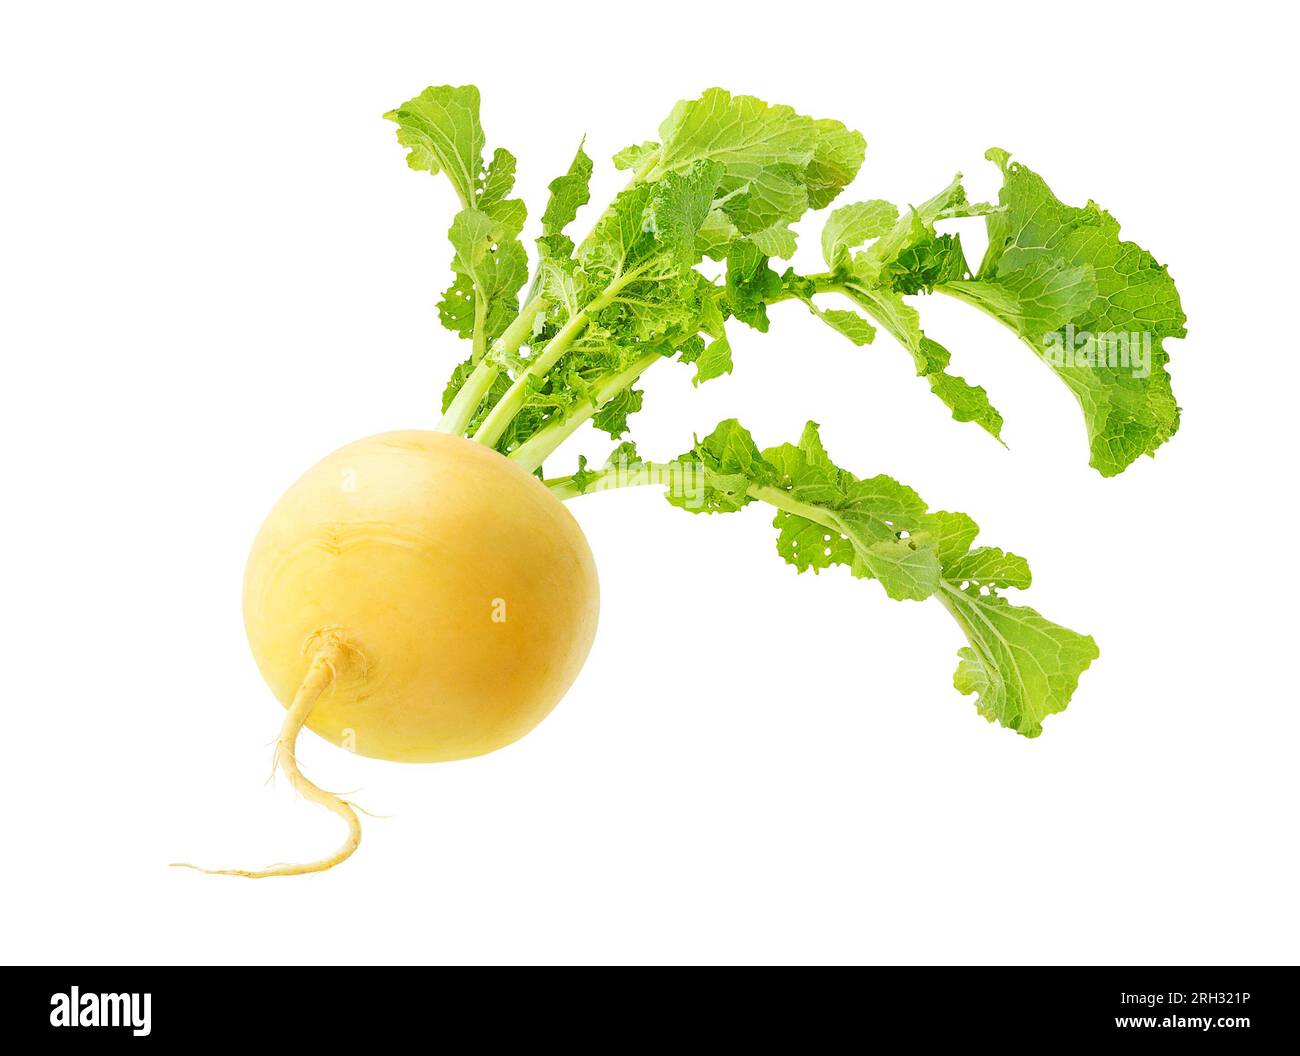 One yellow turnip with leaves isolated on white background Stock Photo